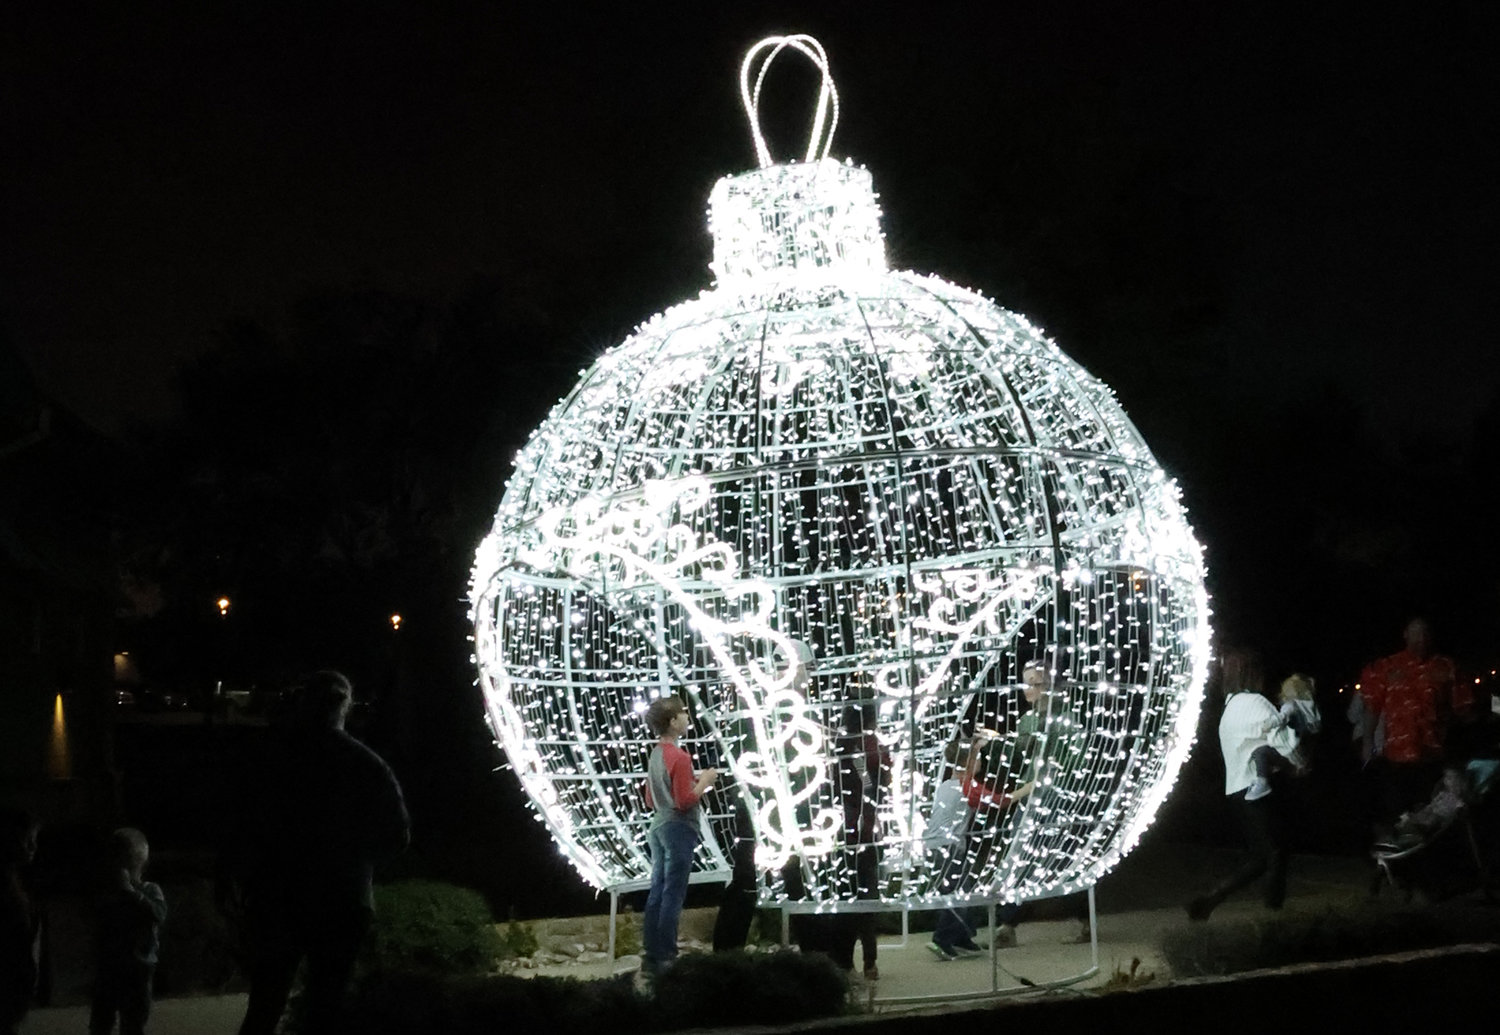 A young visitor takes in the lights at the Hudson Oaks Tree Lighting on Dec. 2.